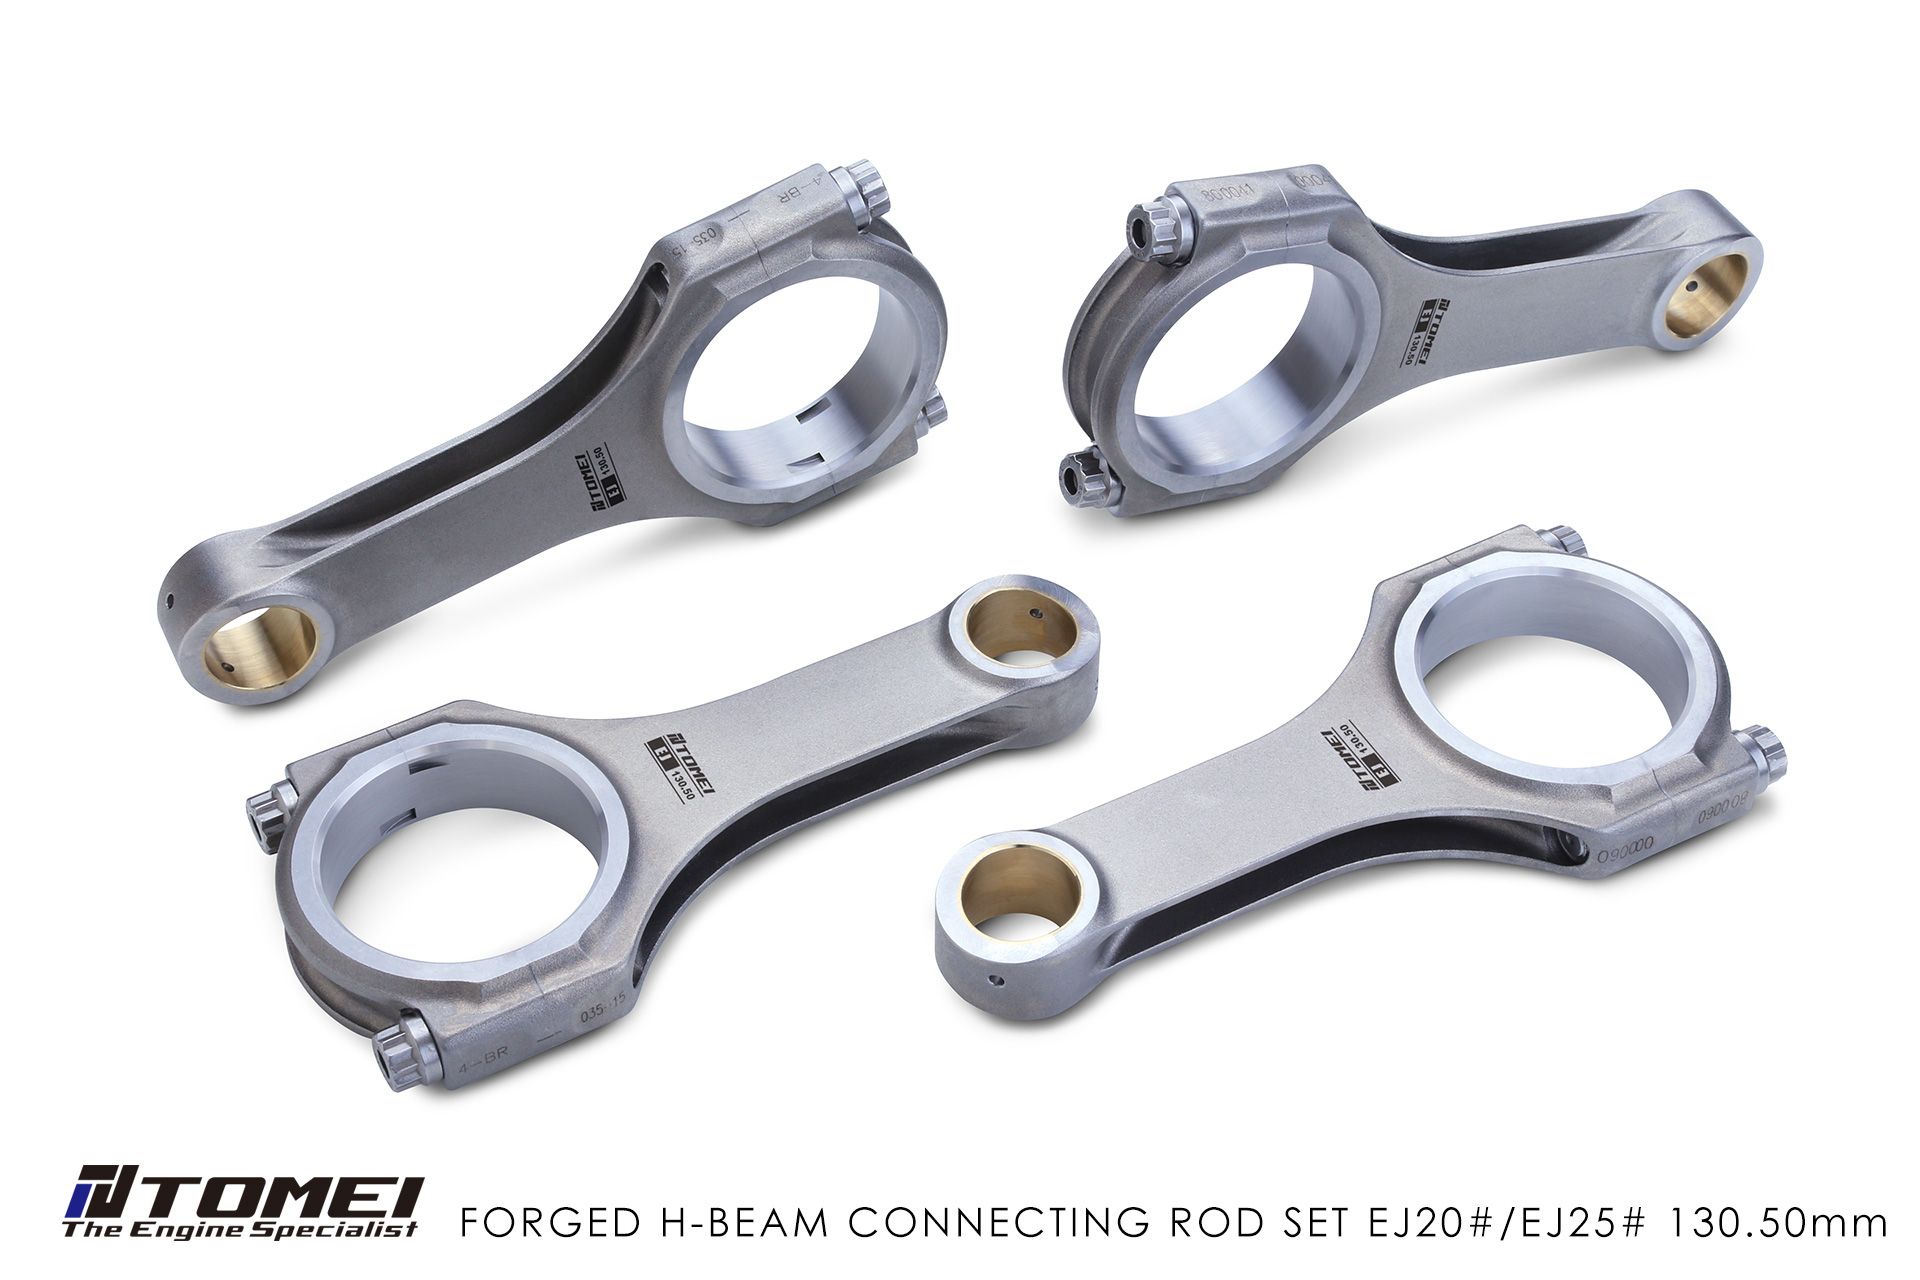 Tomei Forged H-Beam Connecting Rod Set EJ20#/EJ25# 130.50mm